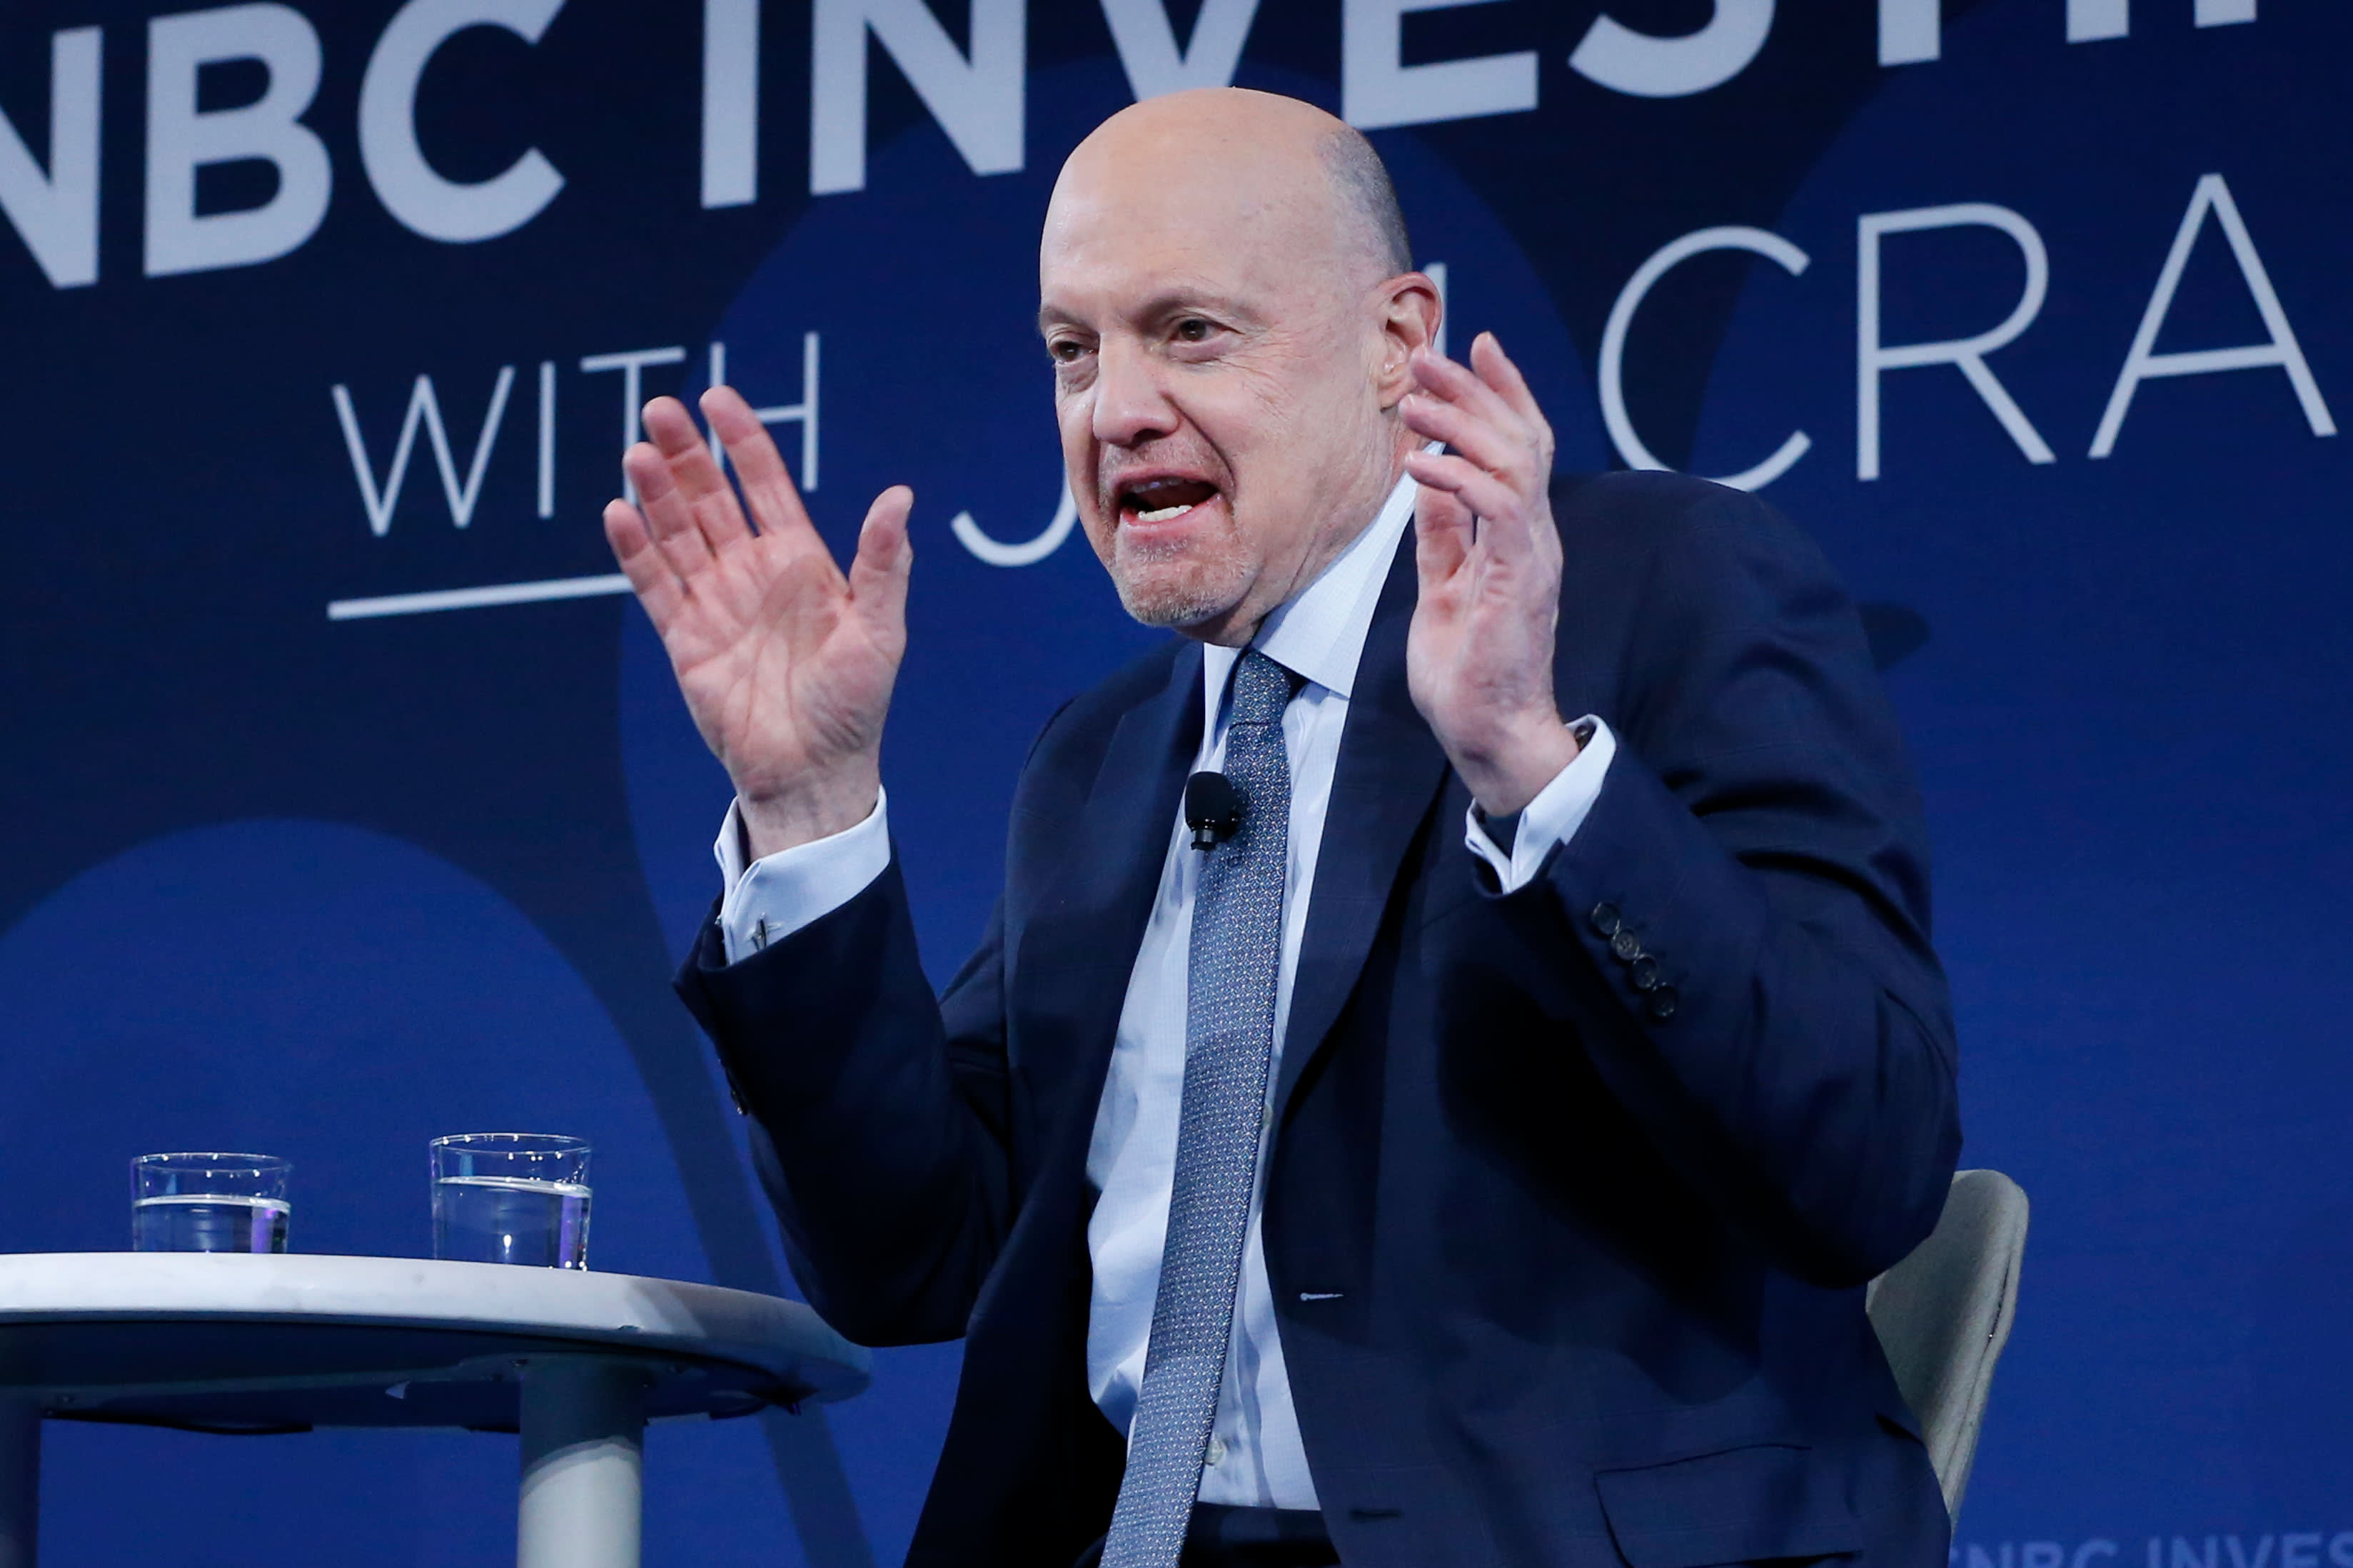 Jim Cramer's Investing Club meeting Thursday: Oversold market, Salesforce, Costco